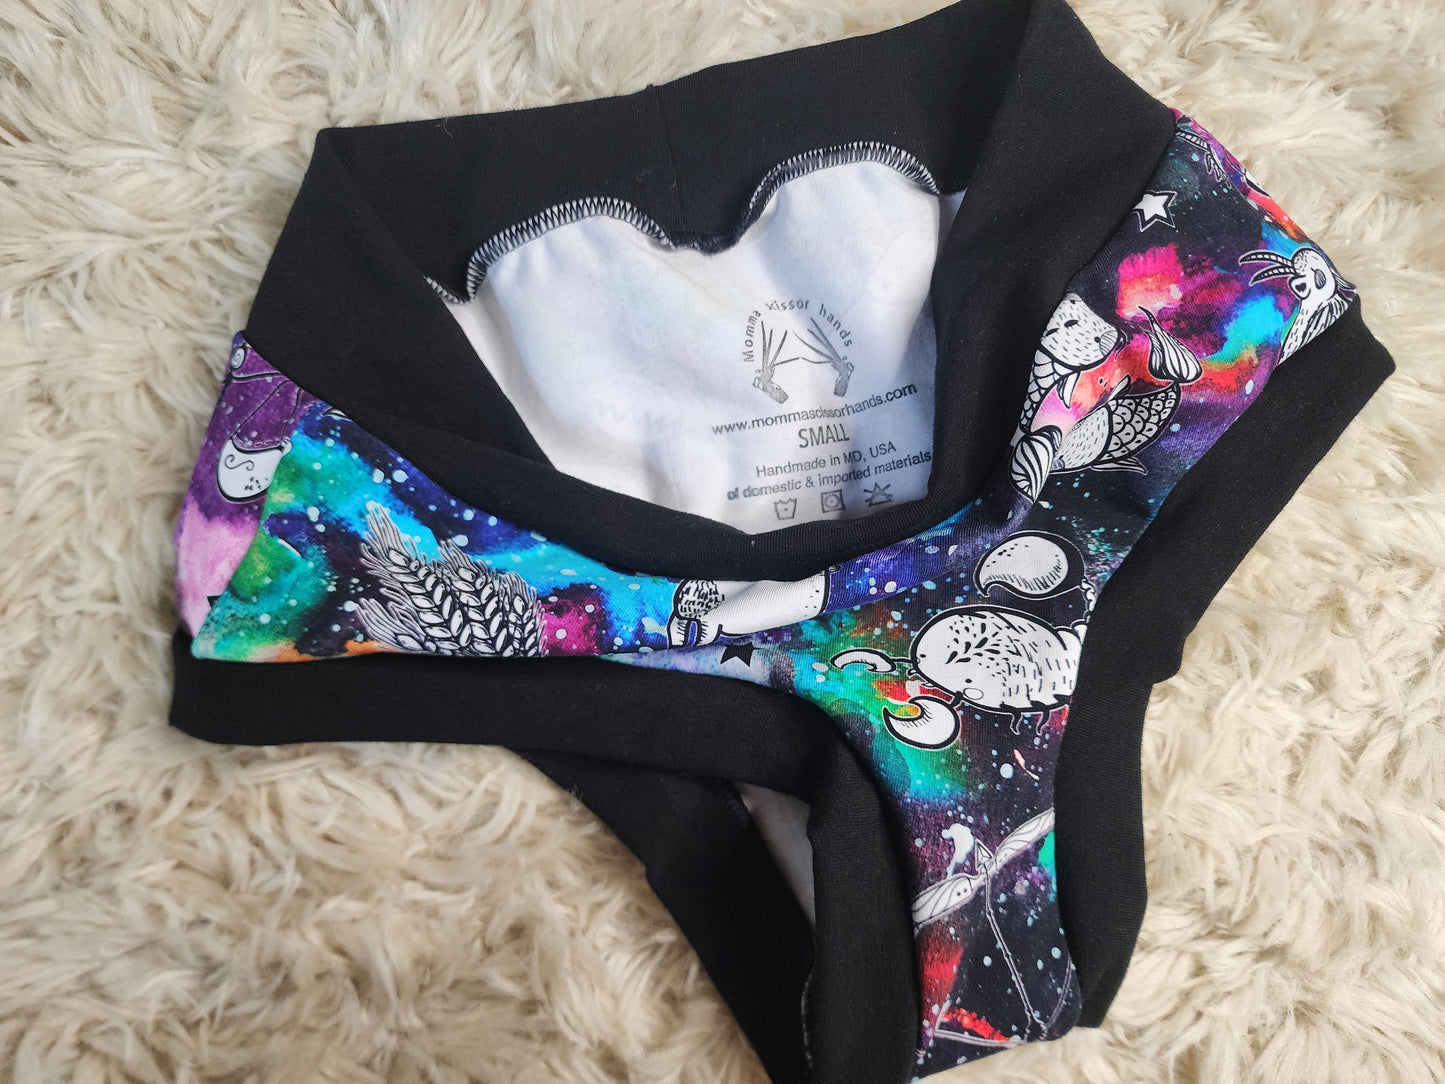 Small. Astrological super booty undies